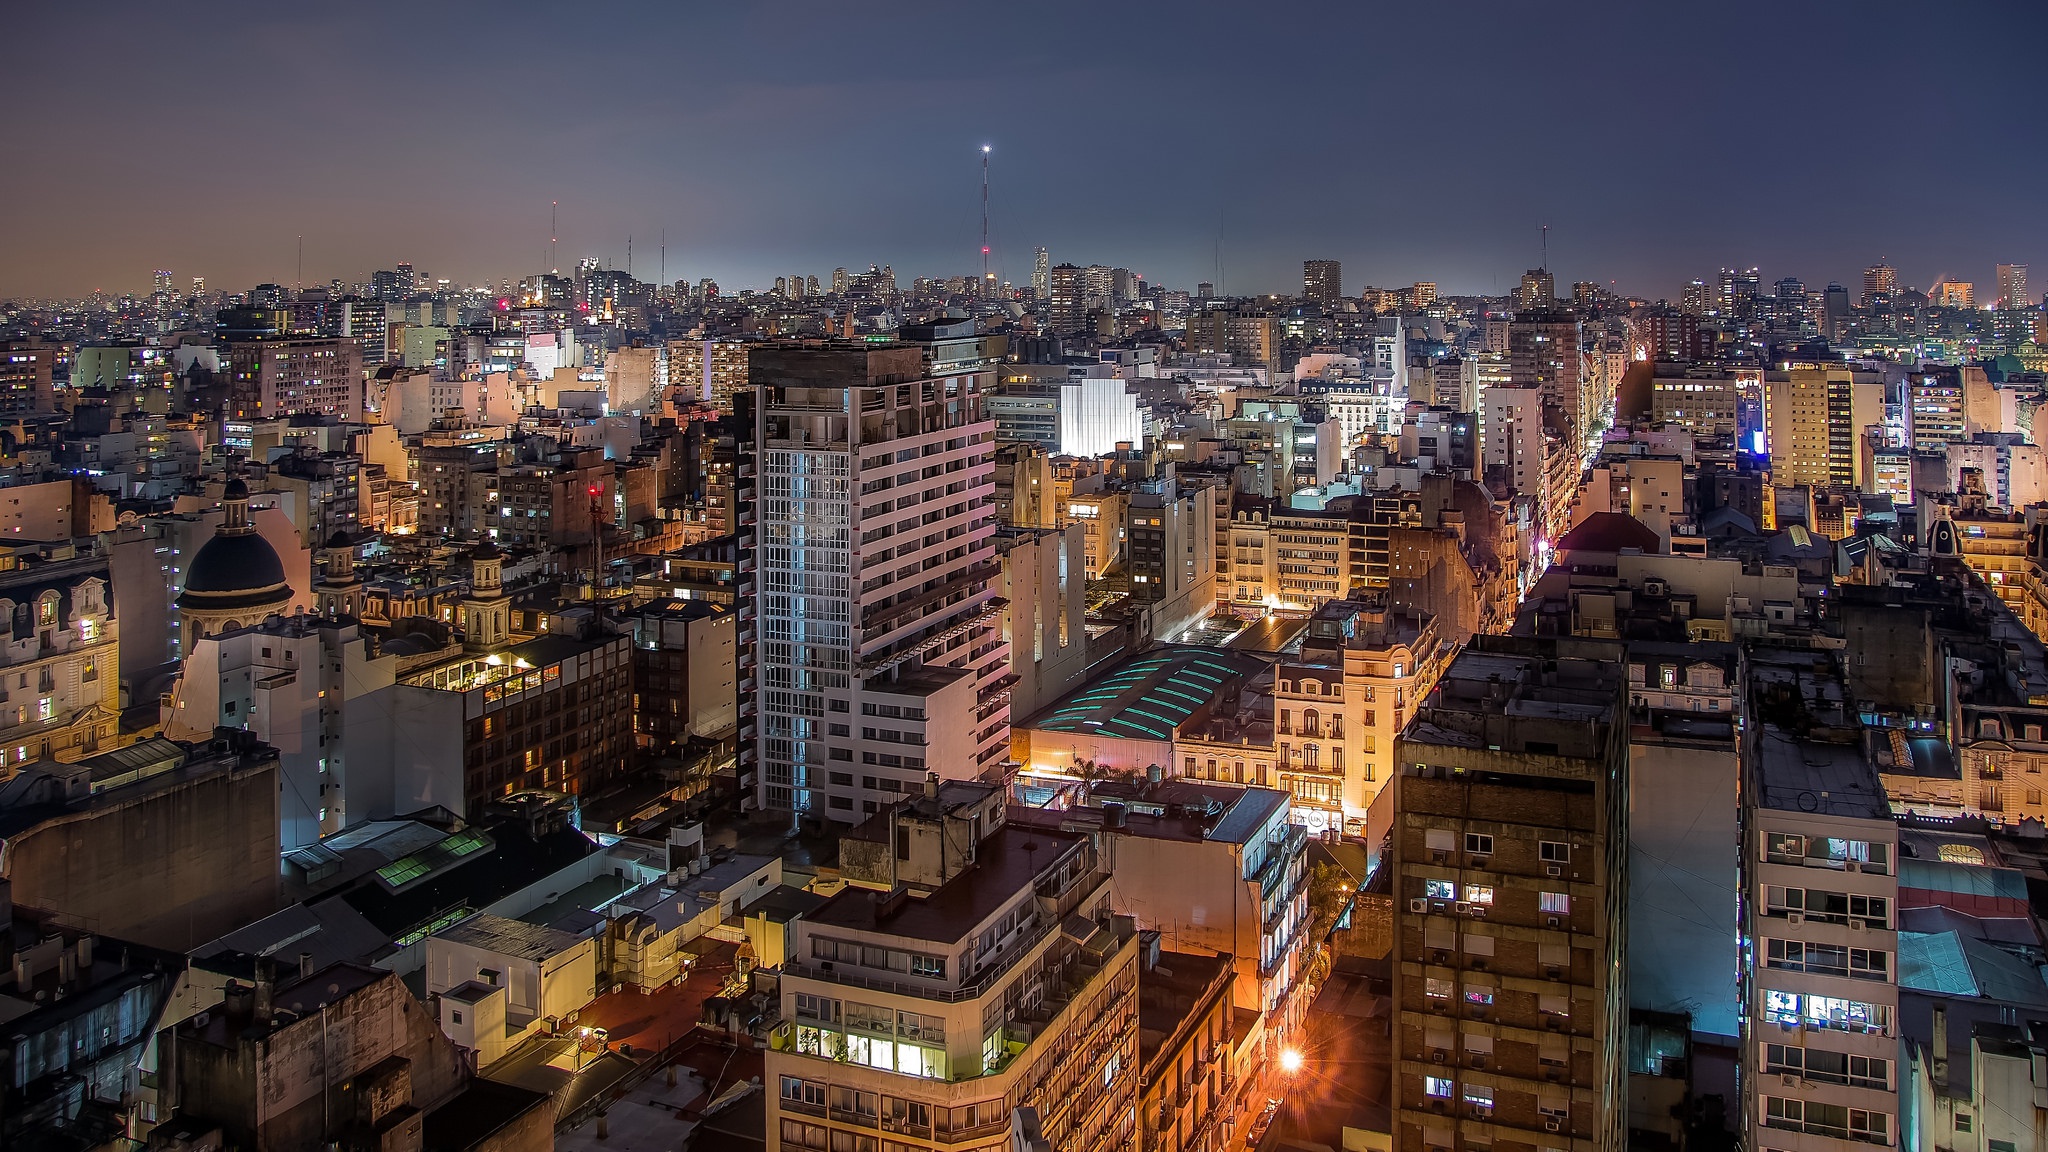 buenos aires, argentina, man made, building, city, cityscape, night, cities